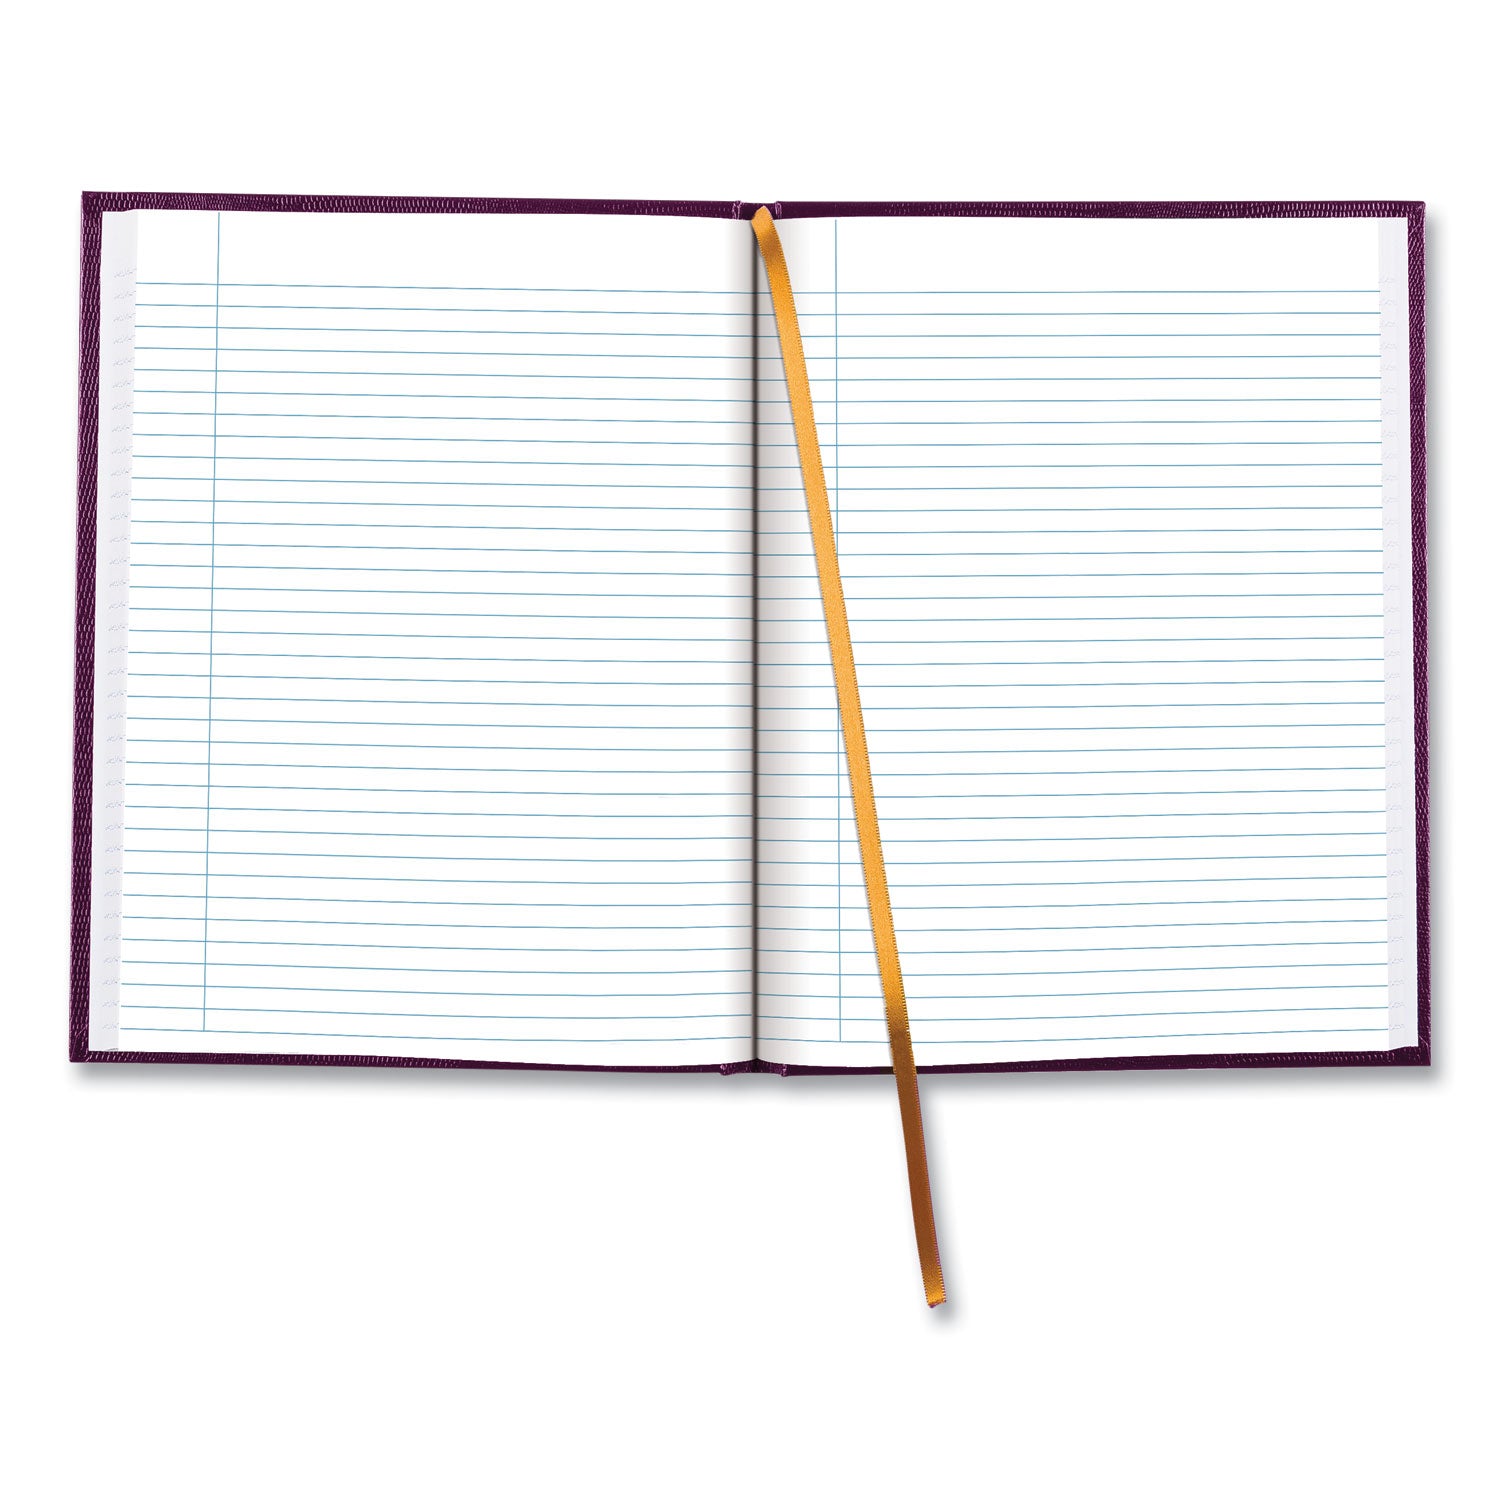 executive-notebook-with-ribbon-bookmark1-subject-medium-college-rule-grape-cover-75-1075-x-85-sheets_reda1095 - 2